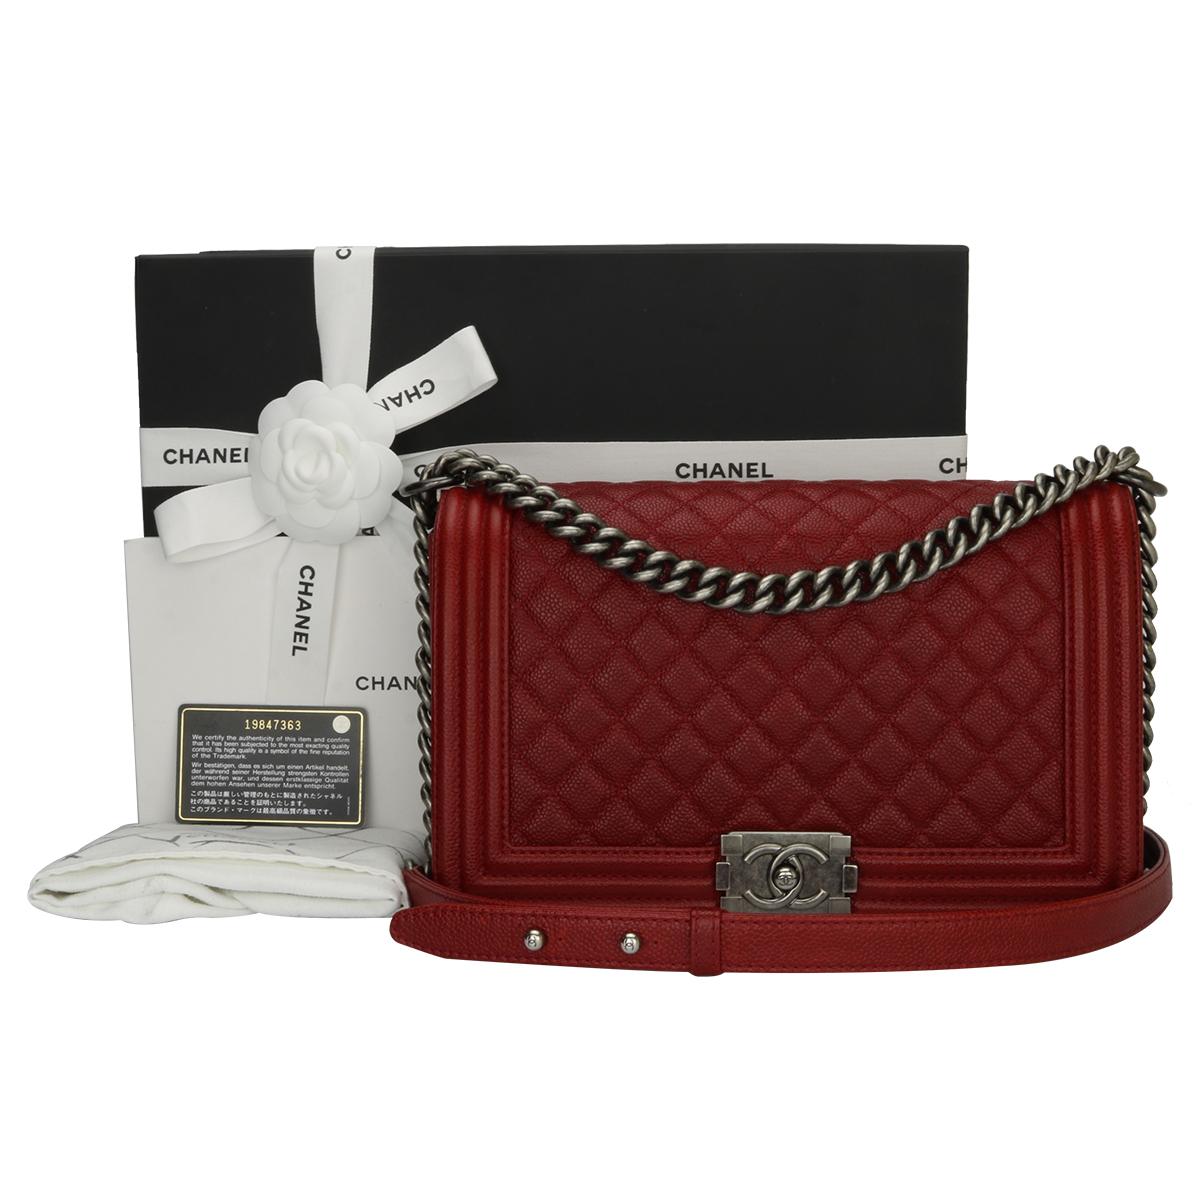 Authentic CHANEL New Medium Quilted Boy Rich Red Caviar with Ruthenium Hardware 2015.

This stunning bag is still in a mint condition; it still keeps its original shape well and the hardware still very shiny, leather smells fresh as if